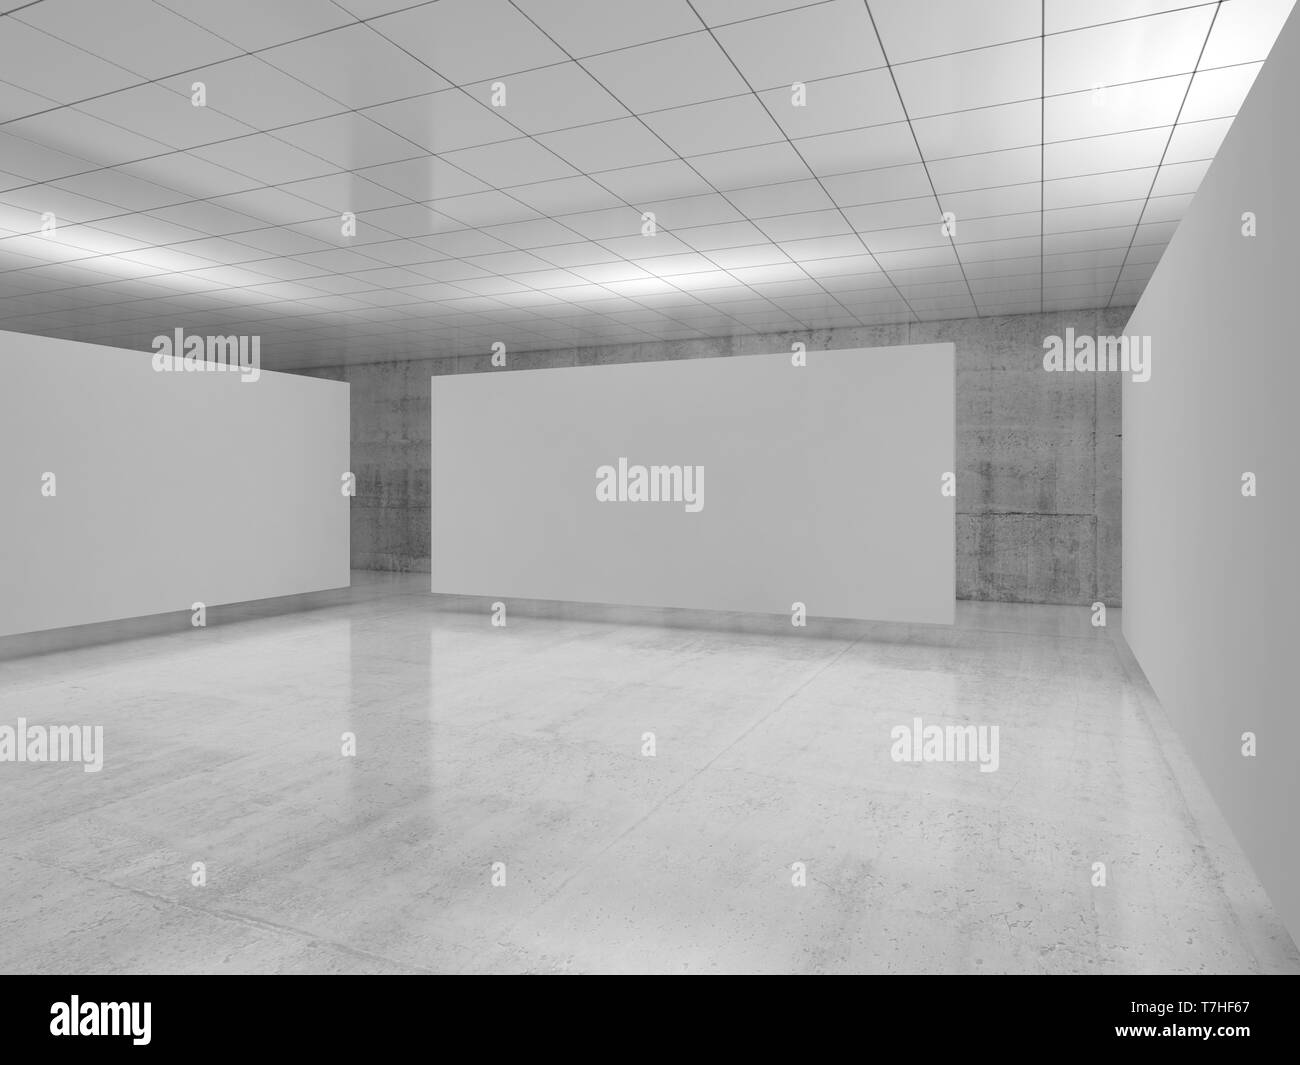 Abstract empty minimalist interior design, white banner stands levitating in exhibition gallery with walls made of polished concrete and shiny ceiling Stock Photo